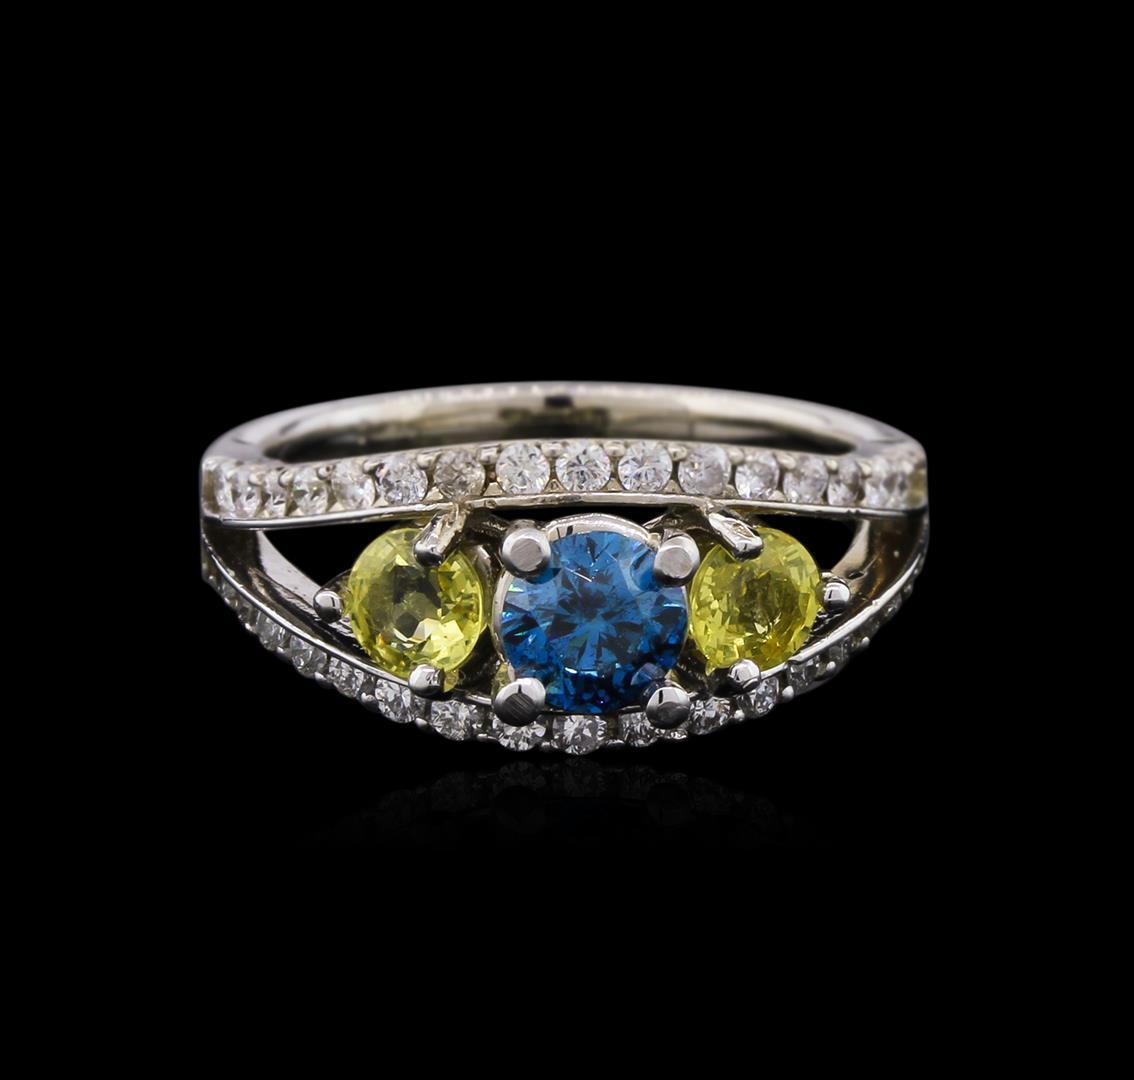 0.54 ctw Blue Diamond and Sapphire Ring - 14KT White Gold